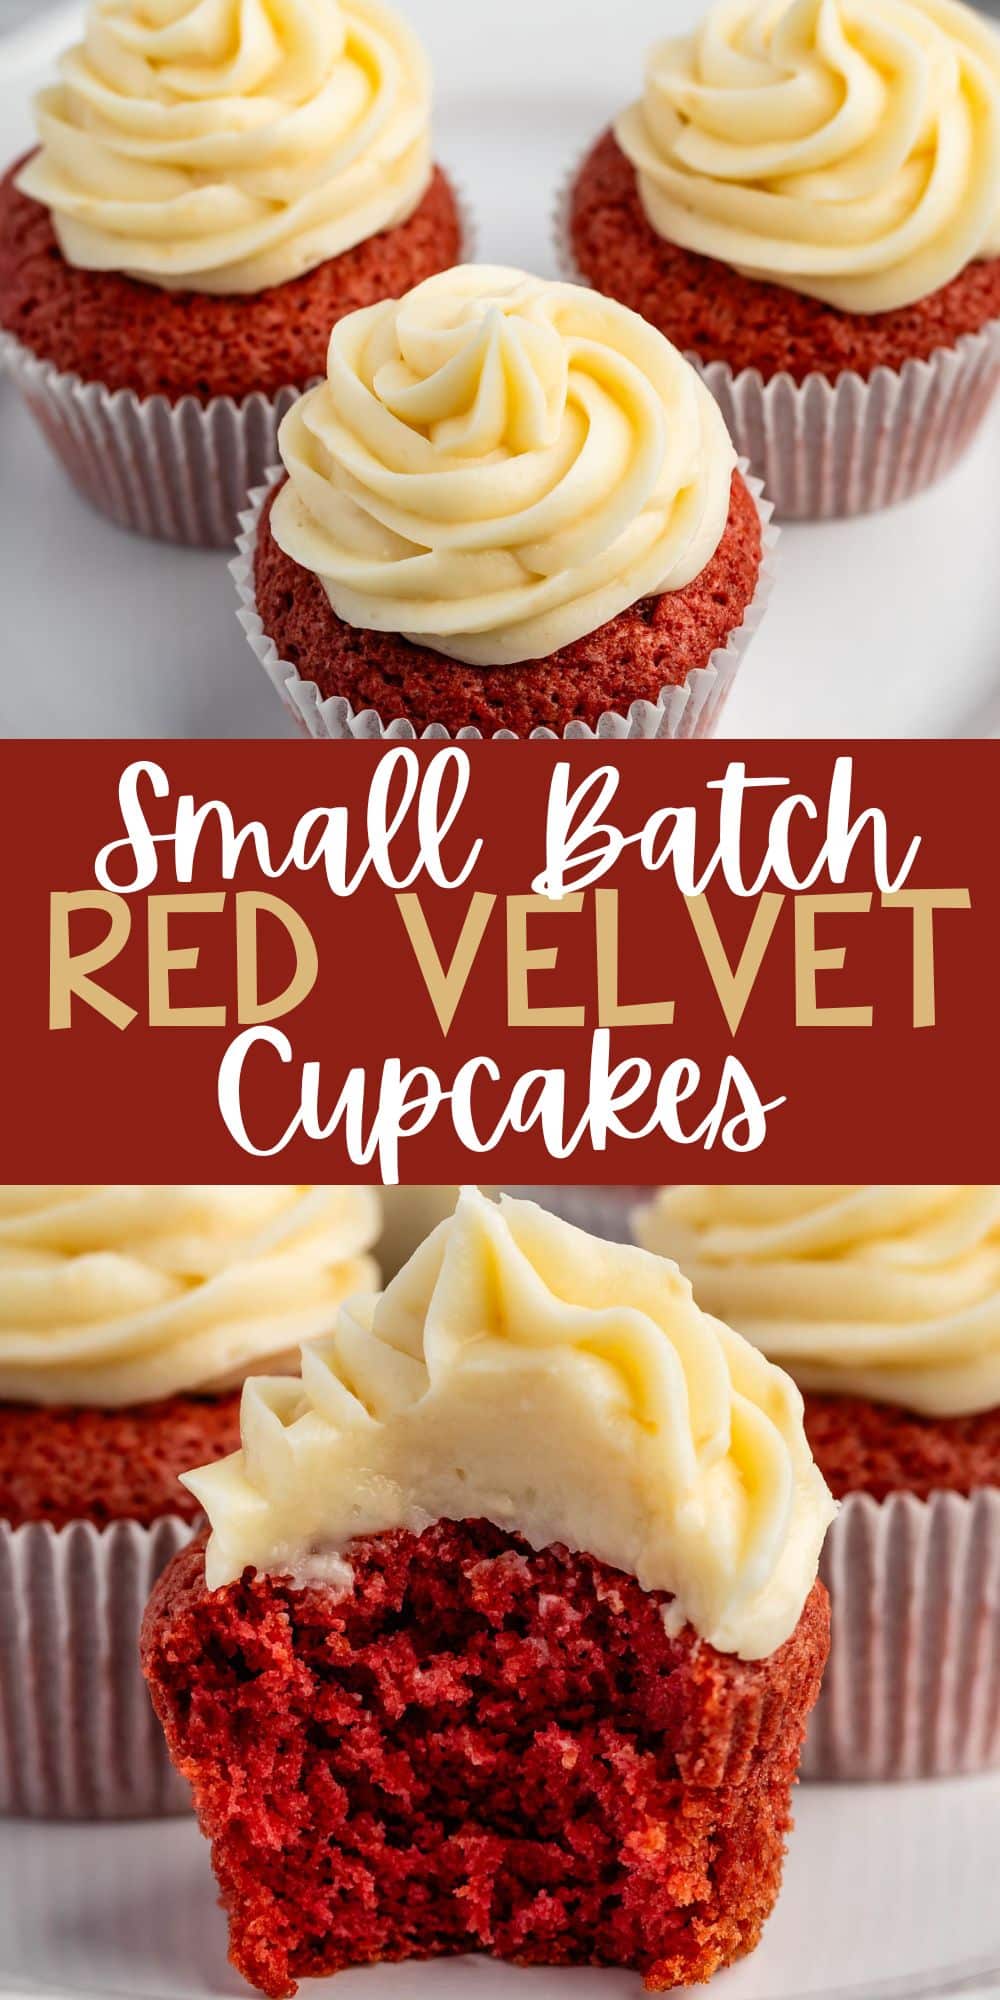 two photos of red cupcakes with frosting on top on a white plate with words on the image.